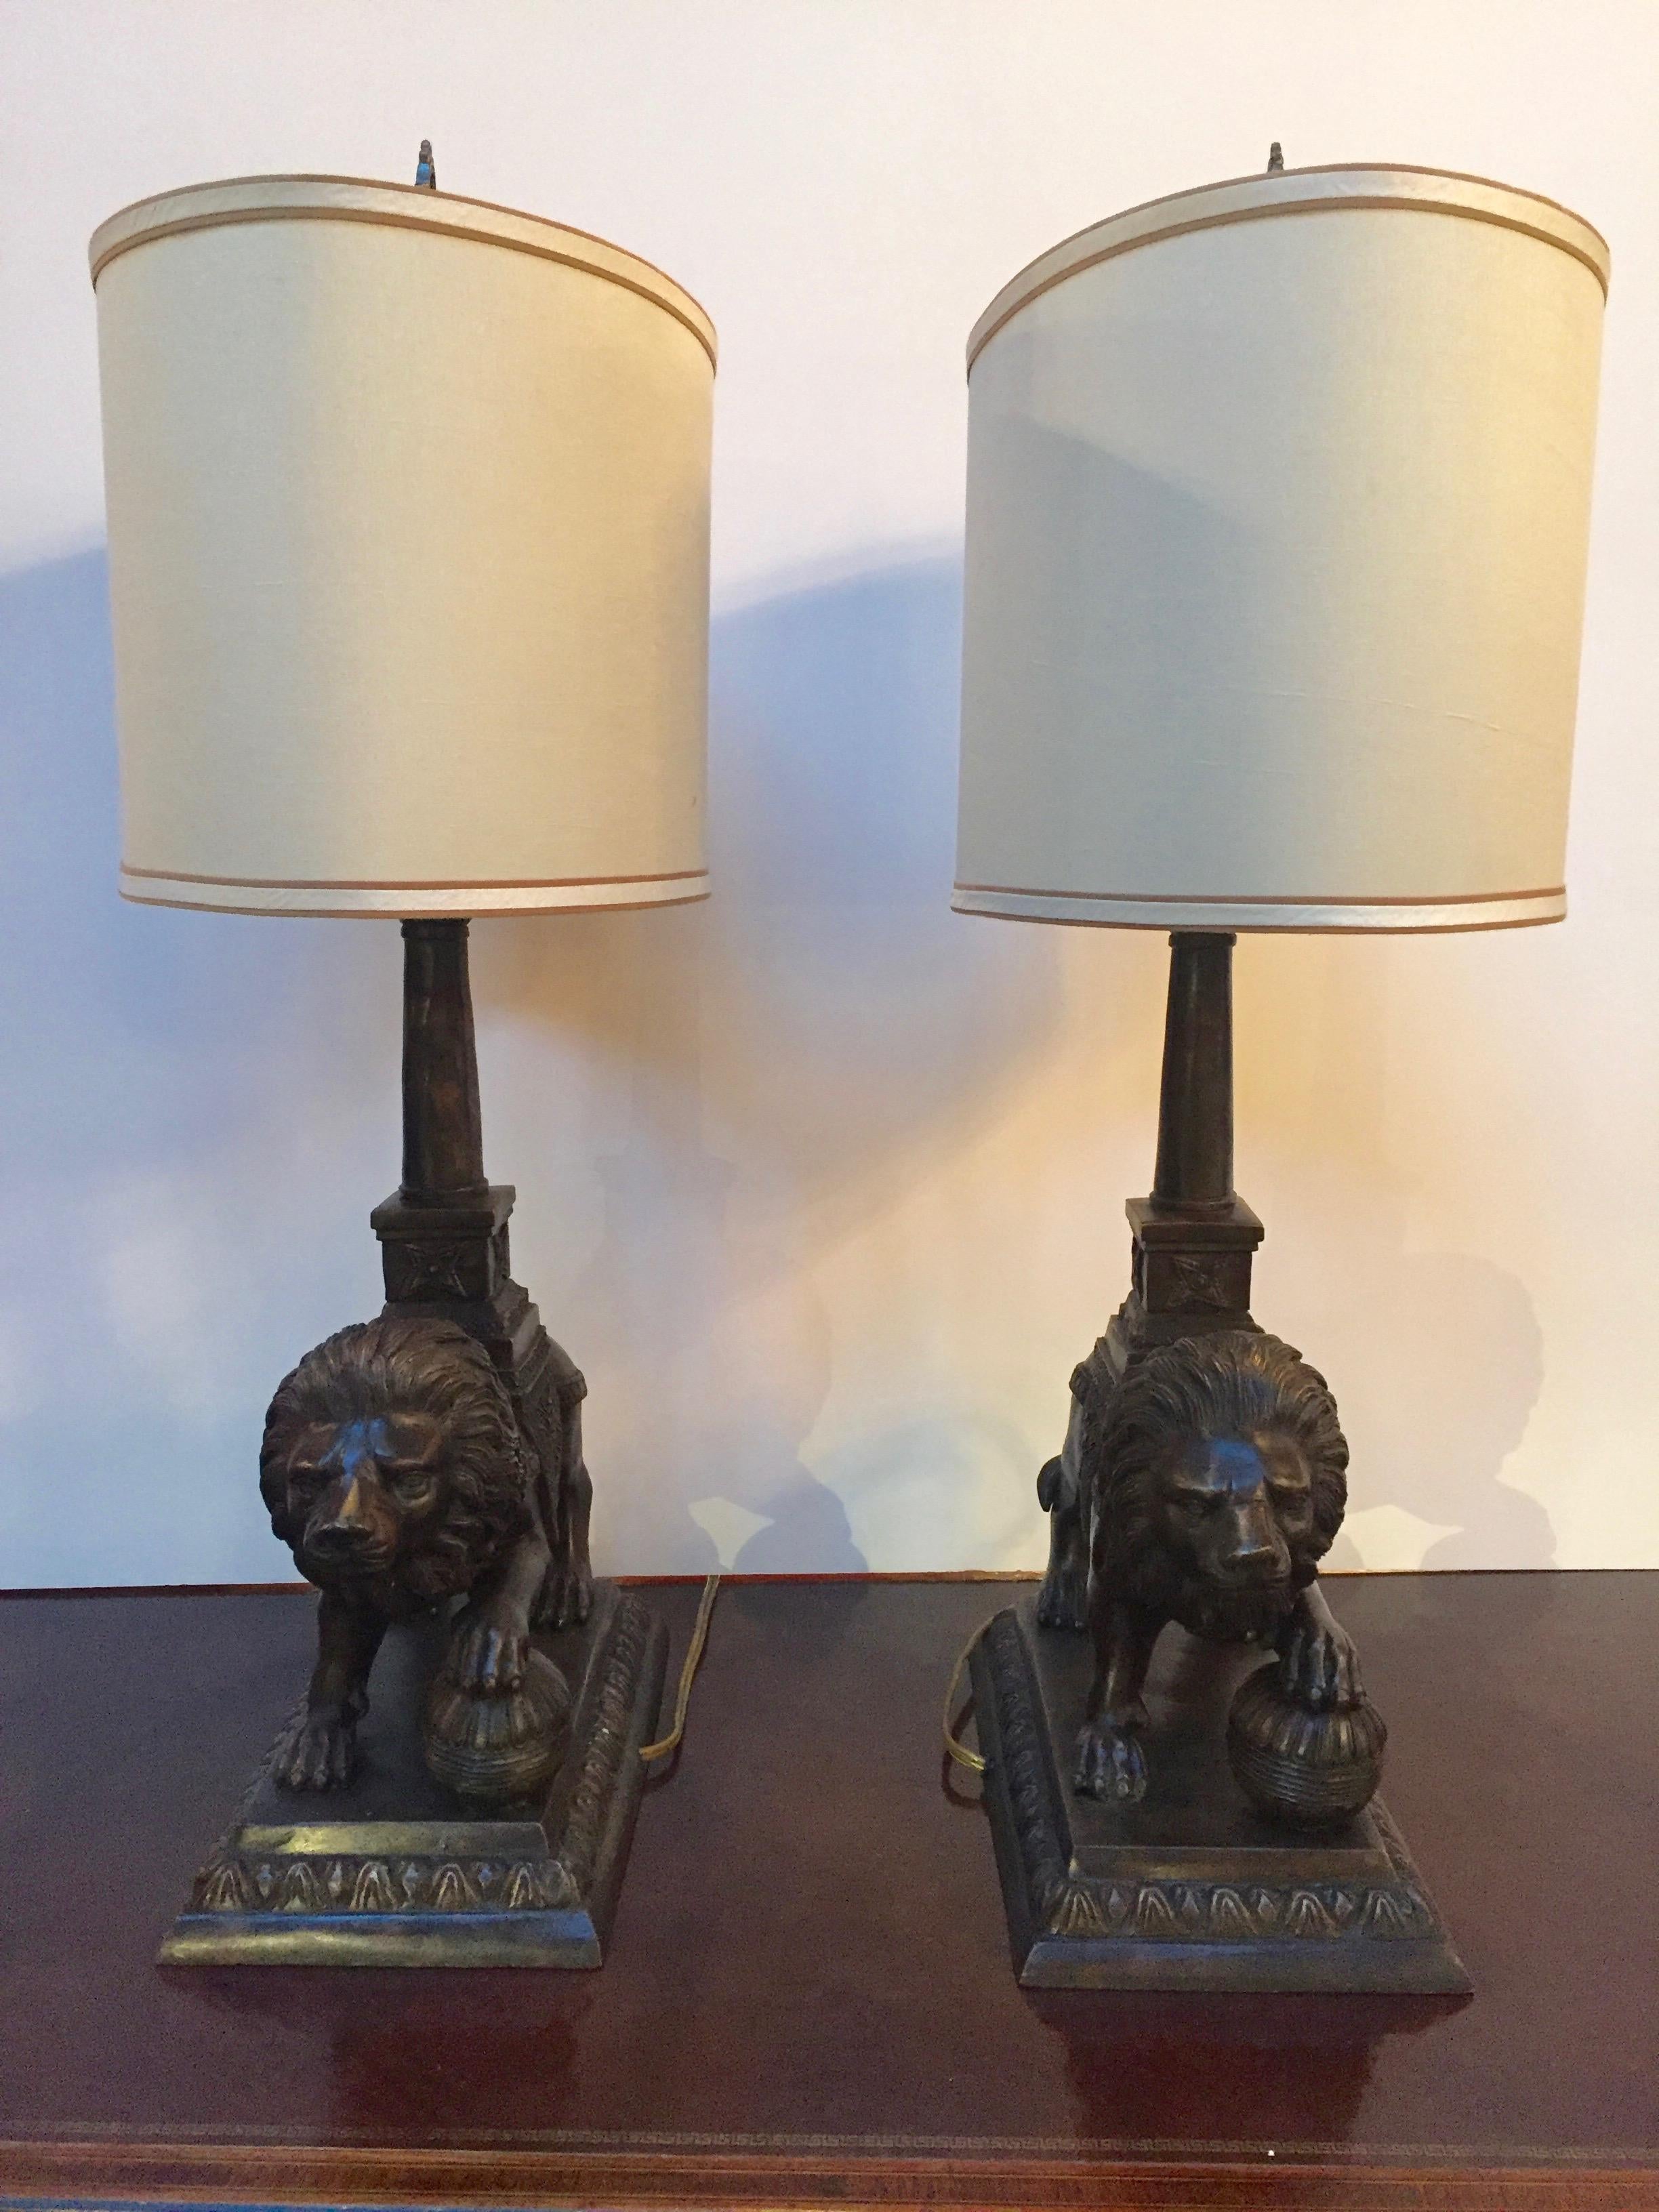 Impressive pair of lamps having bronze sculptures of lions on bronze bases.
Each lamp has one socket for 60 watt bulb.
16 x 10 shades.